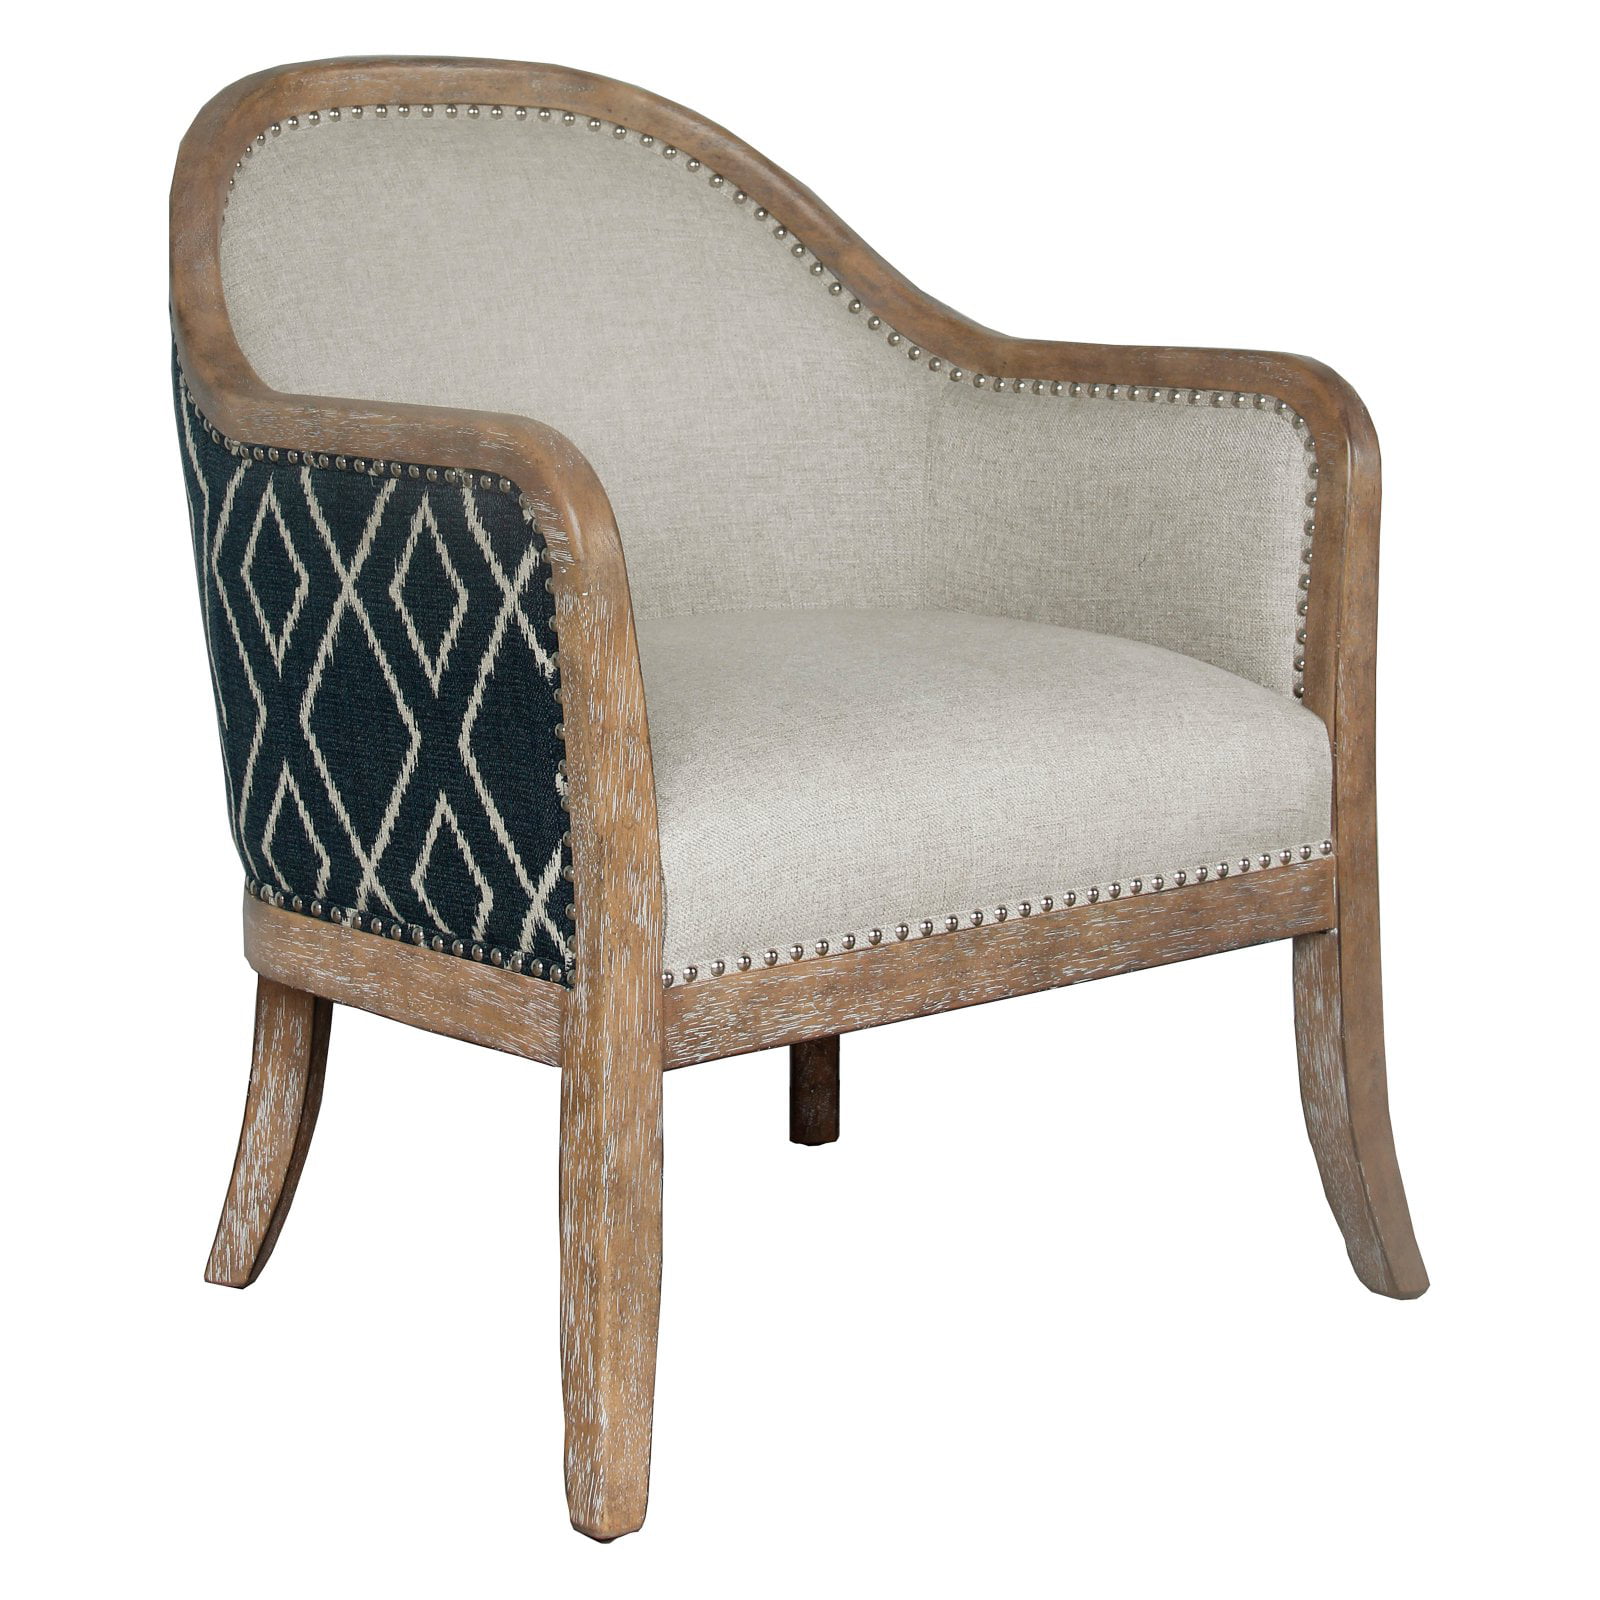 Two-Tone Wood Frame Accent Chair - Walmart.com